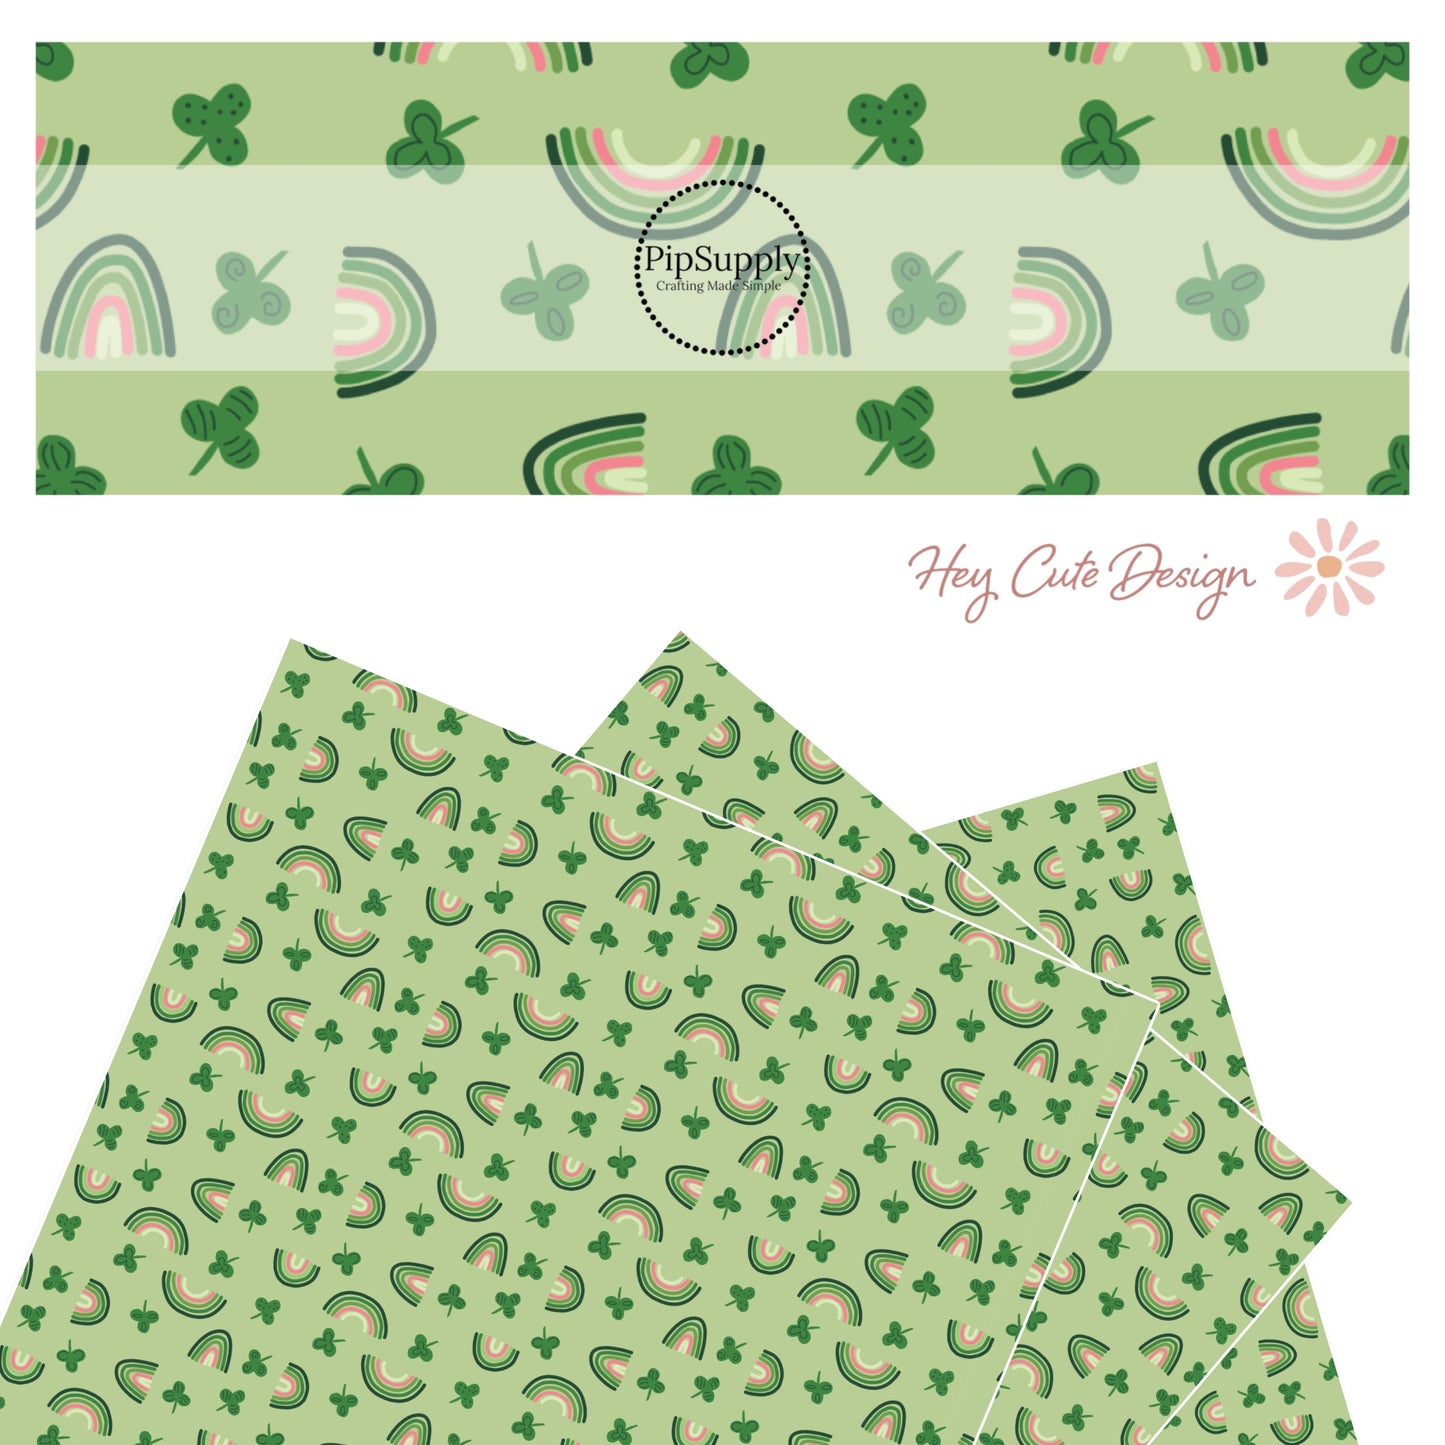 Green and pink rainbows and with green clovers with polka dots on a green faux leather sheet